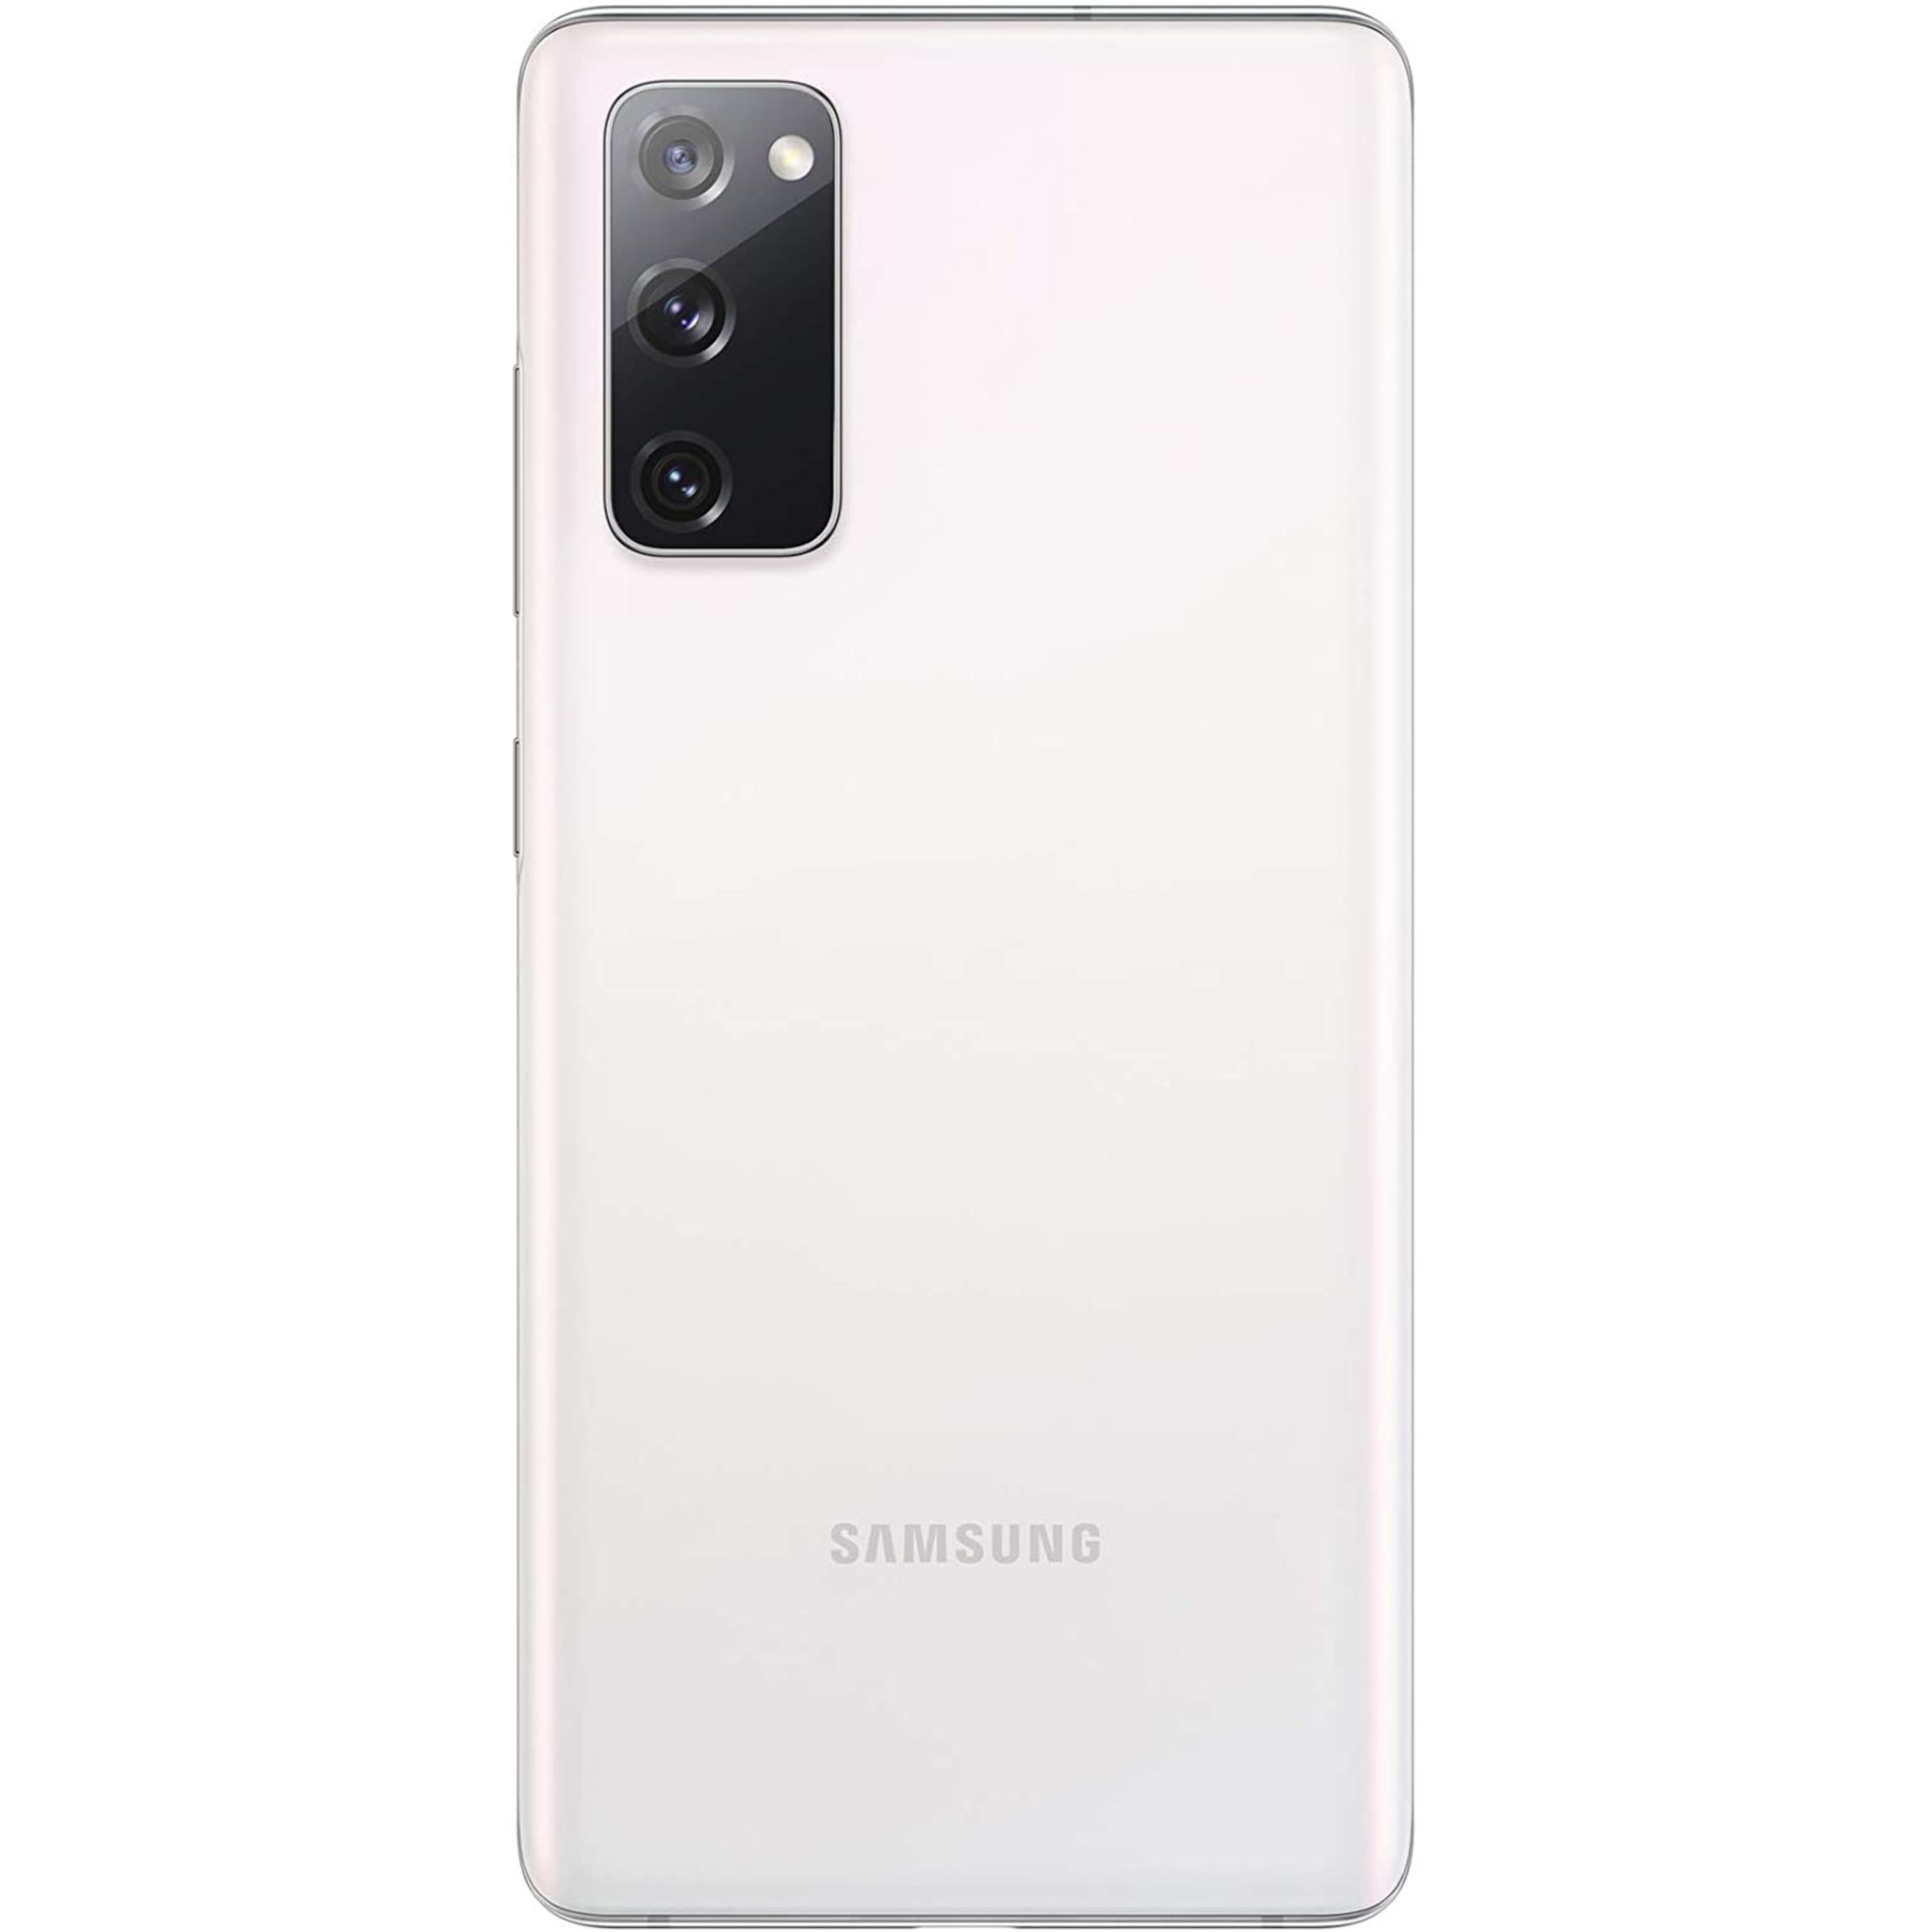 Samsung Galaxy S20 FE G780G 128GB Dual Sim GSM Unlocked Android Smart Phone (Latin America Variant/US Compatible LTE) - Cloud White - image 2 of 4